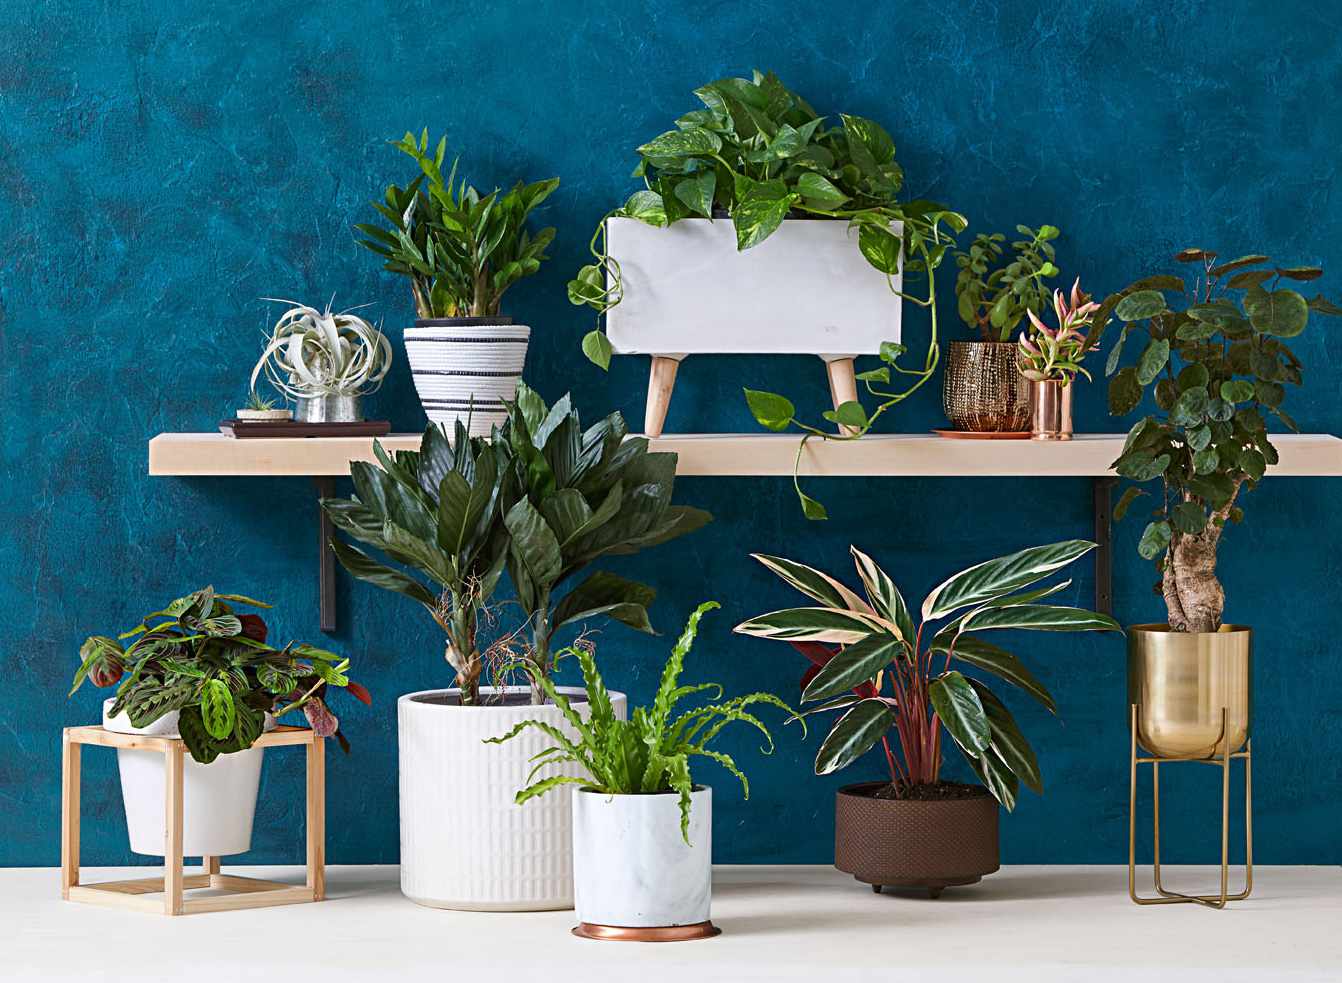 Up Your Style With These Houseplants   Midwest Living